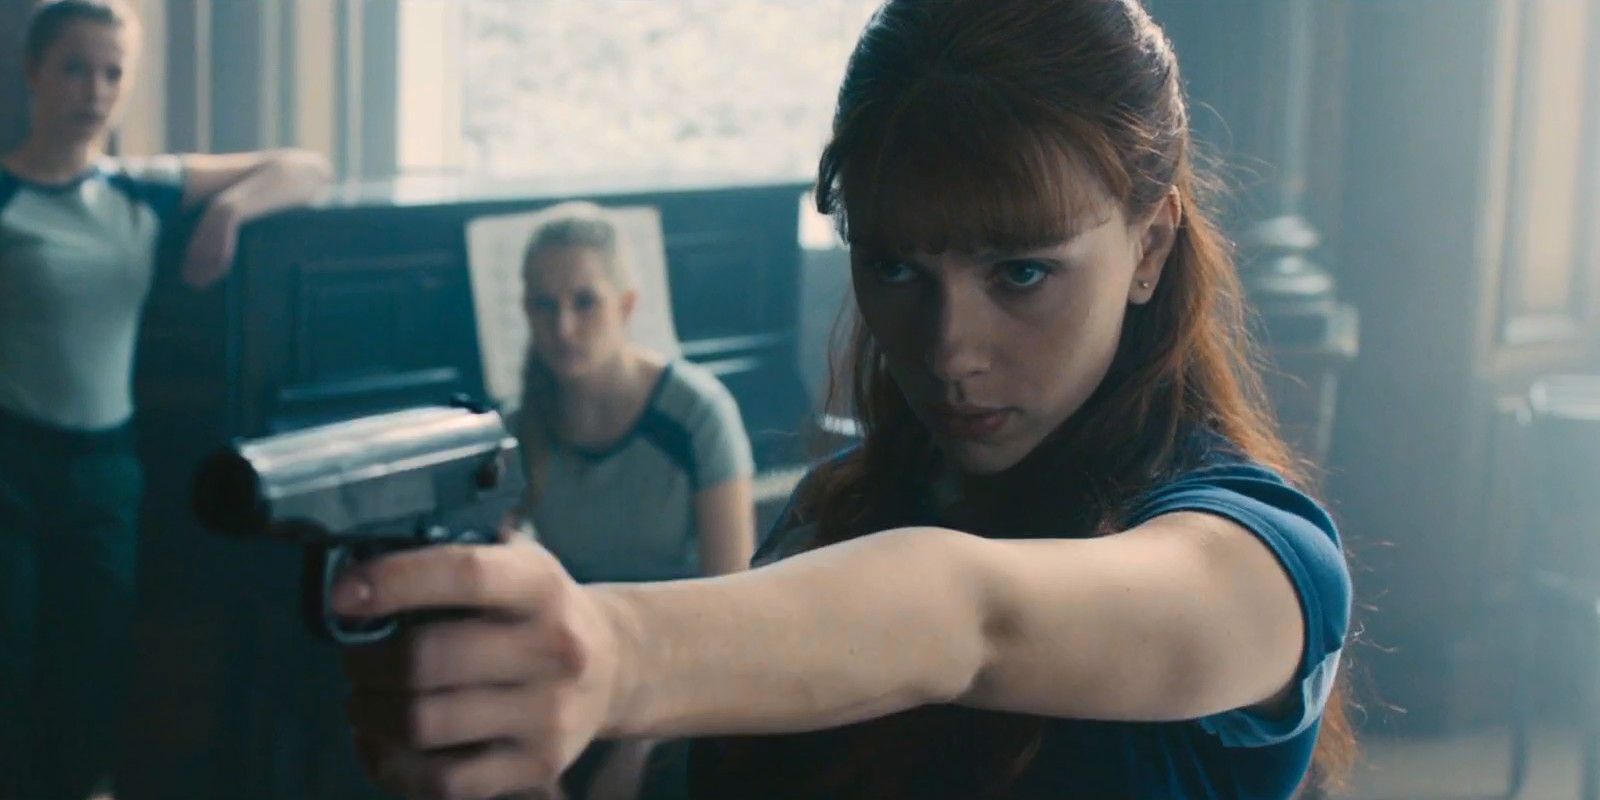 Black Widow and her vision as she aims a gun in the Red Room in Avengers: Age of Ultron